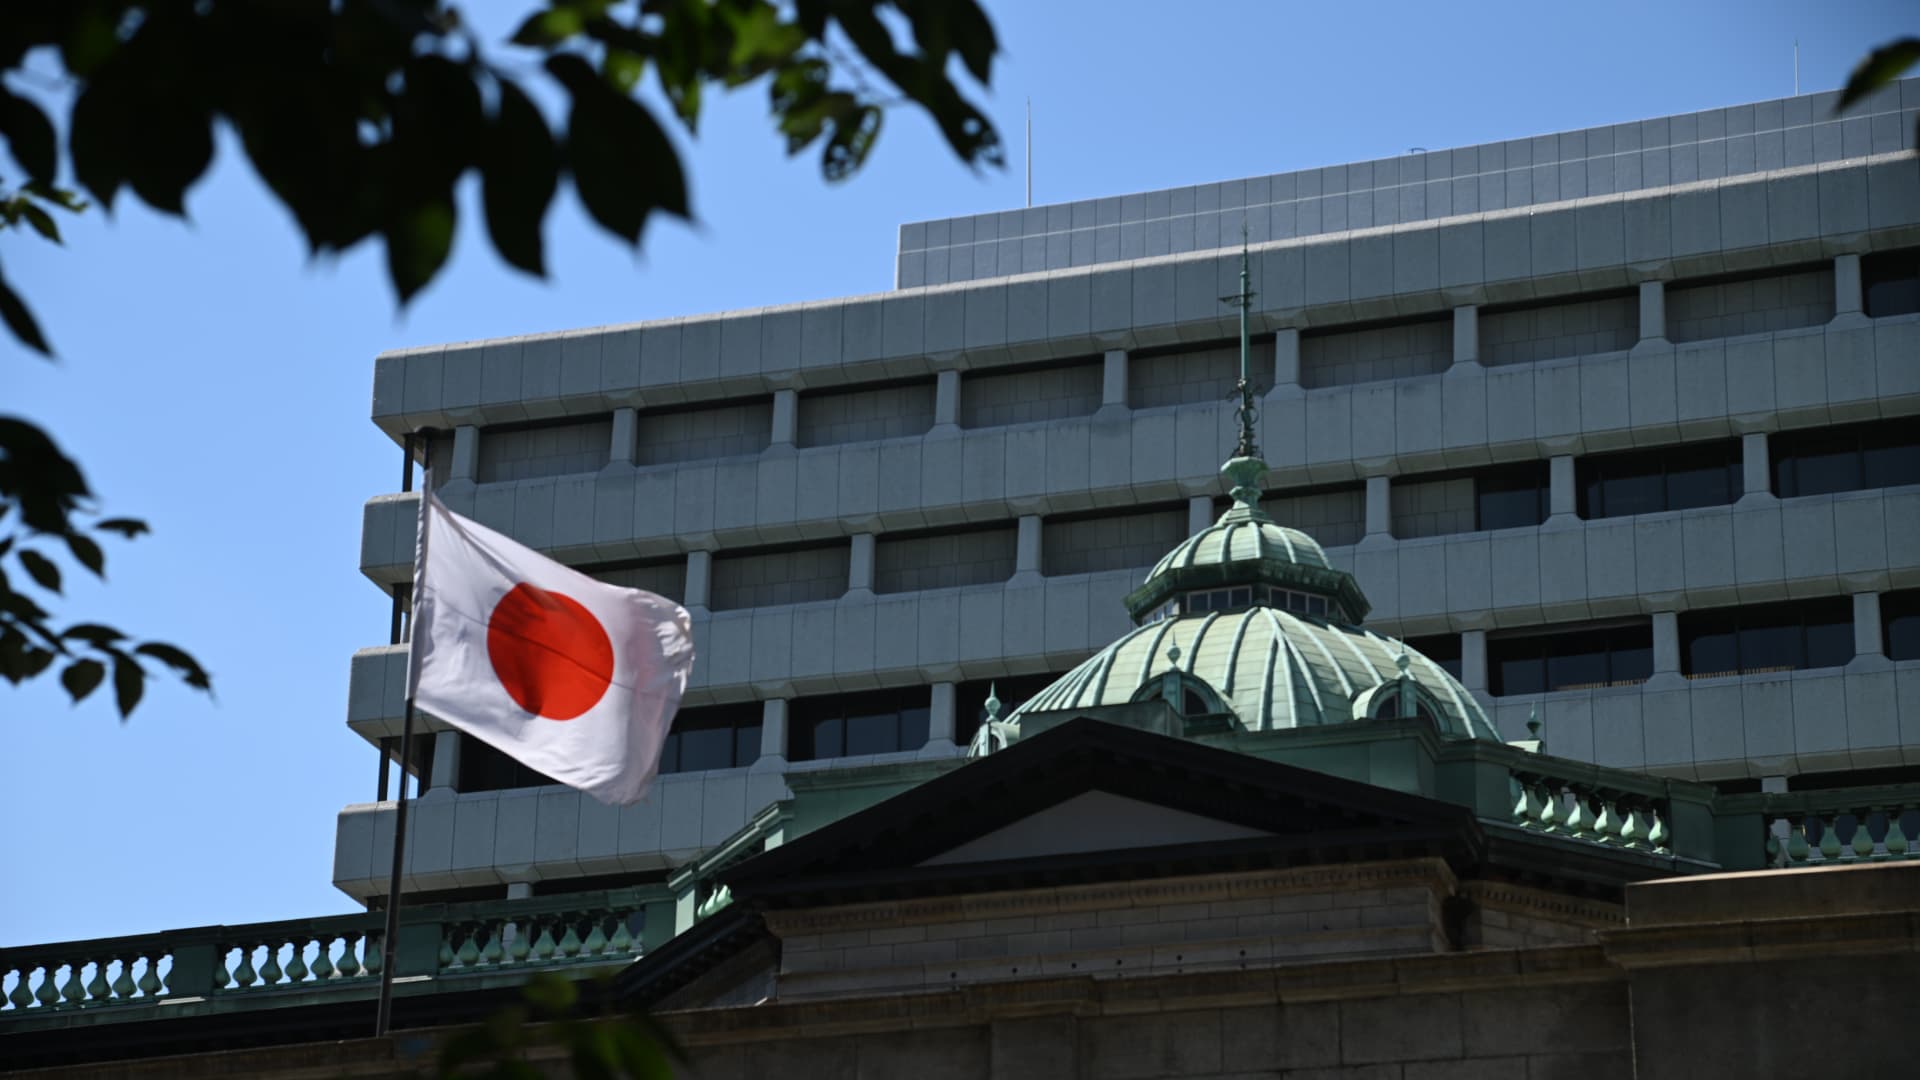 The Bank of Japan just shocked markets with a policy tweak — here’s why it matters